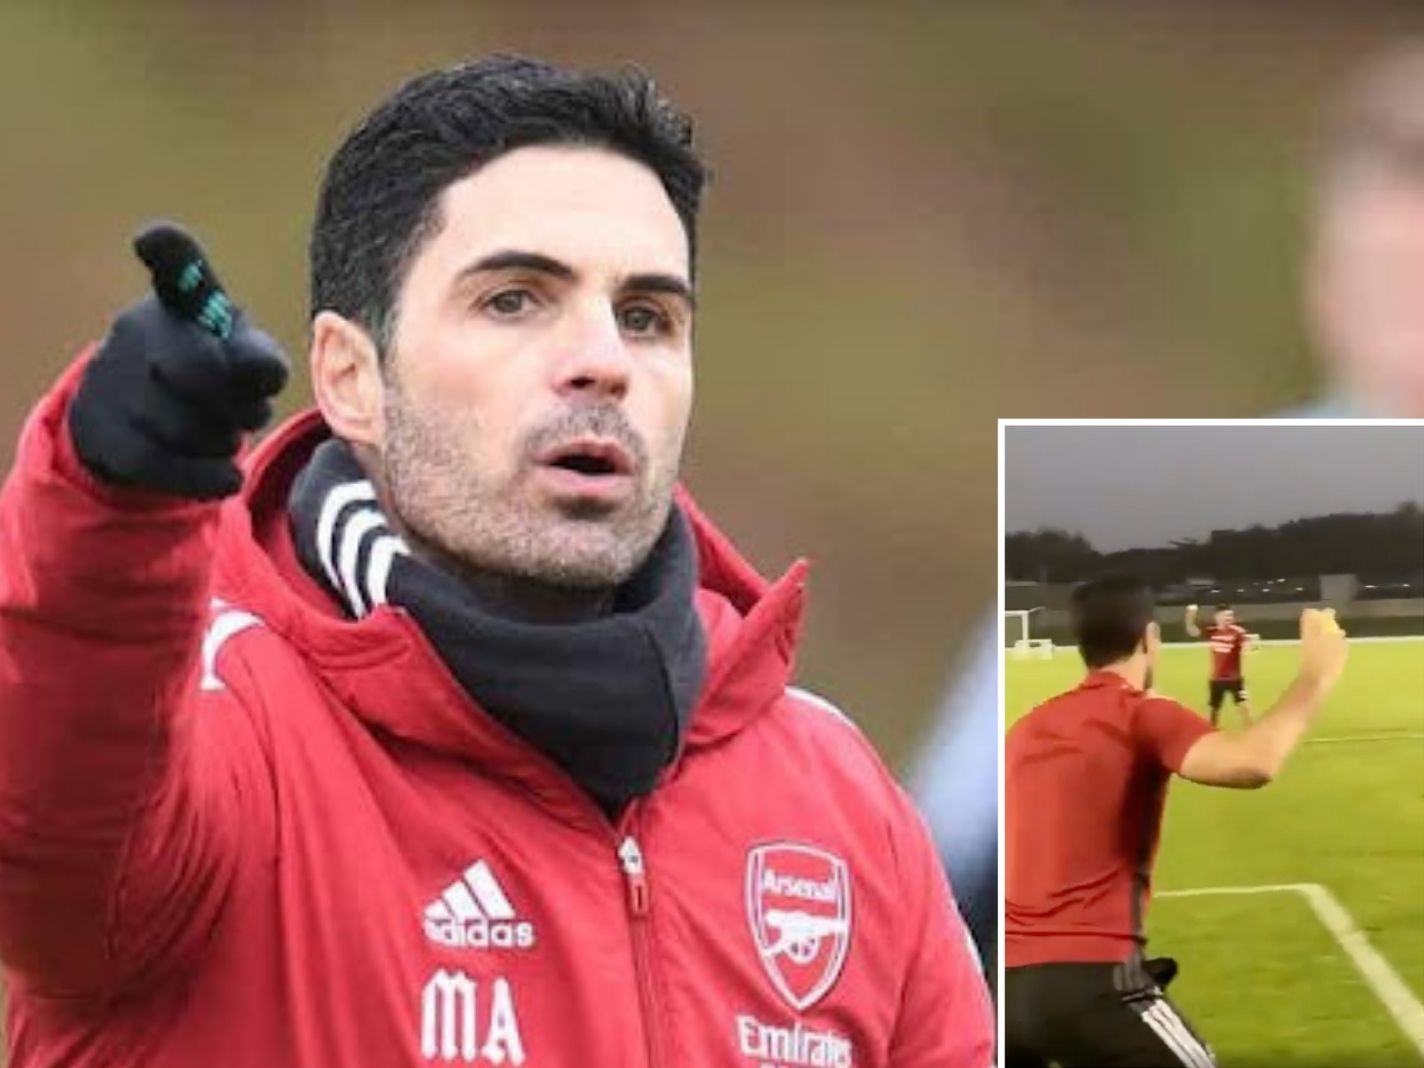 Arsenal players get served with tennis balls in bizarre new training drill